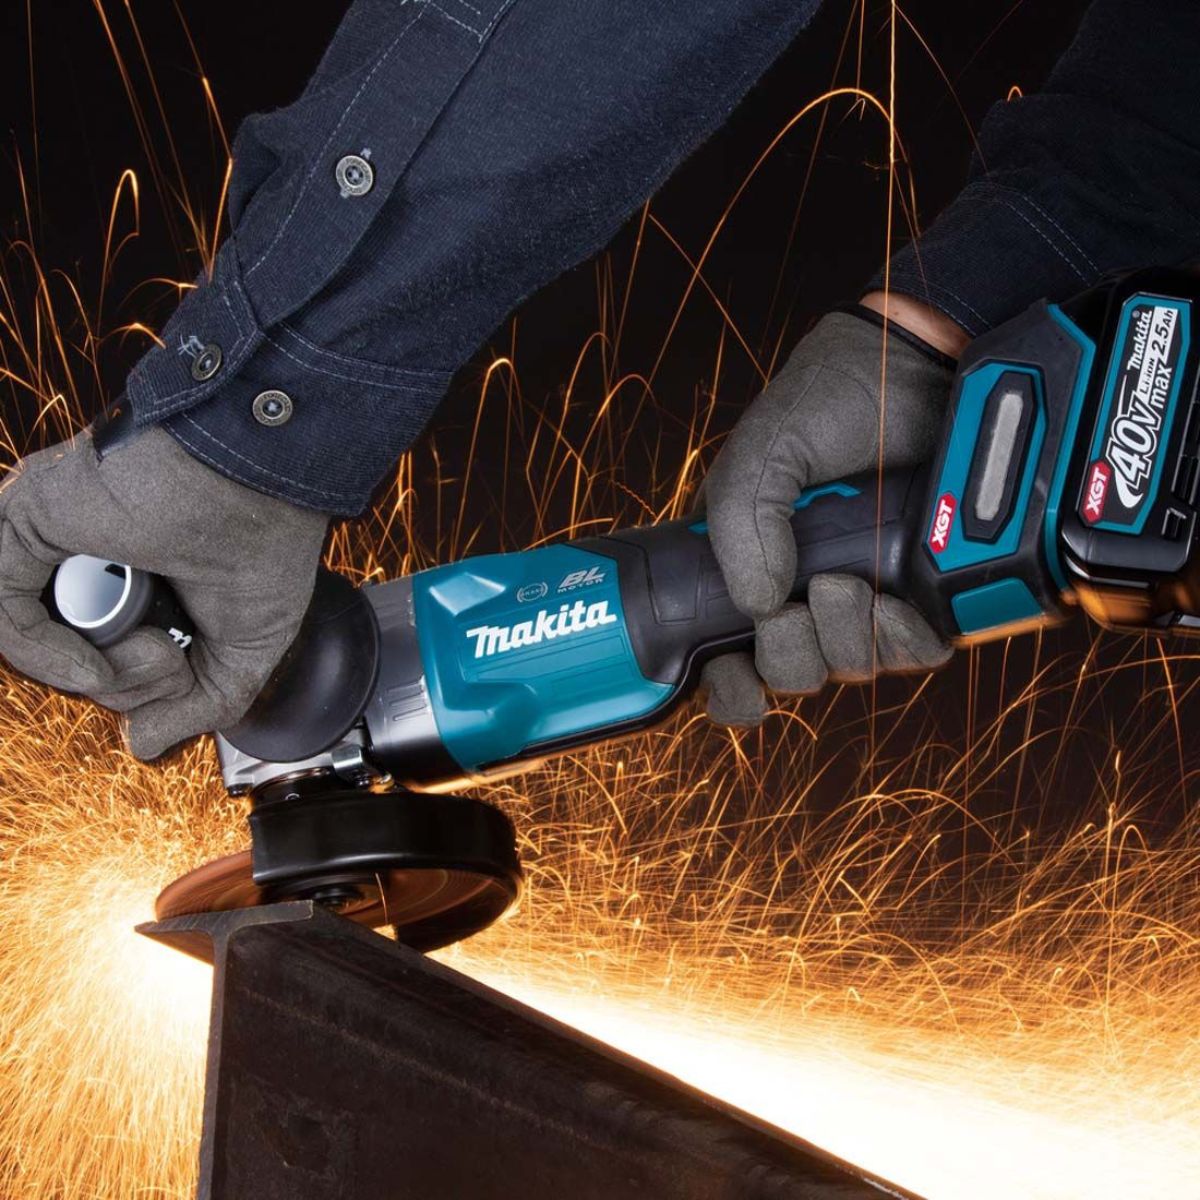 Makita GA013GZ01 40v XGT Max 125mm Brushless Angle Grinder Body Only With Carry Case